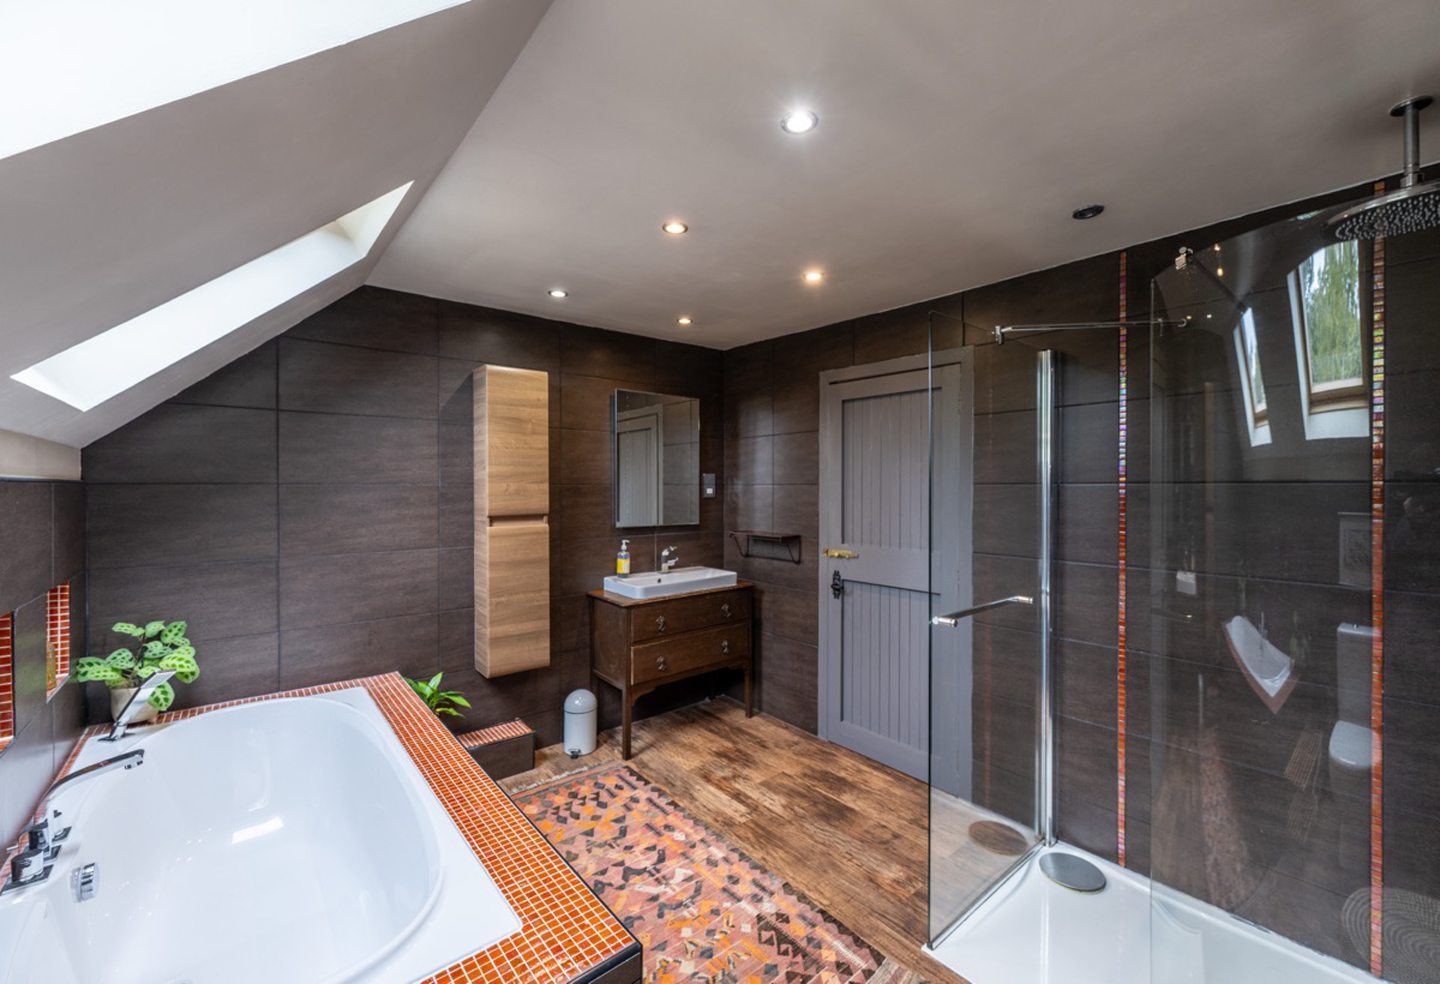 The bathroom in the lodge and creamery in Torphins with dark wood tones, orange tiled accents, on the walls and sinks